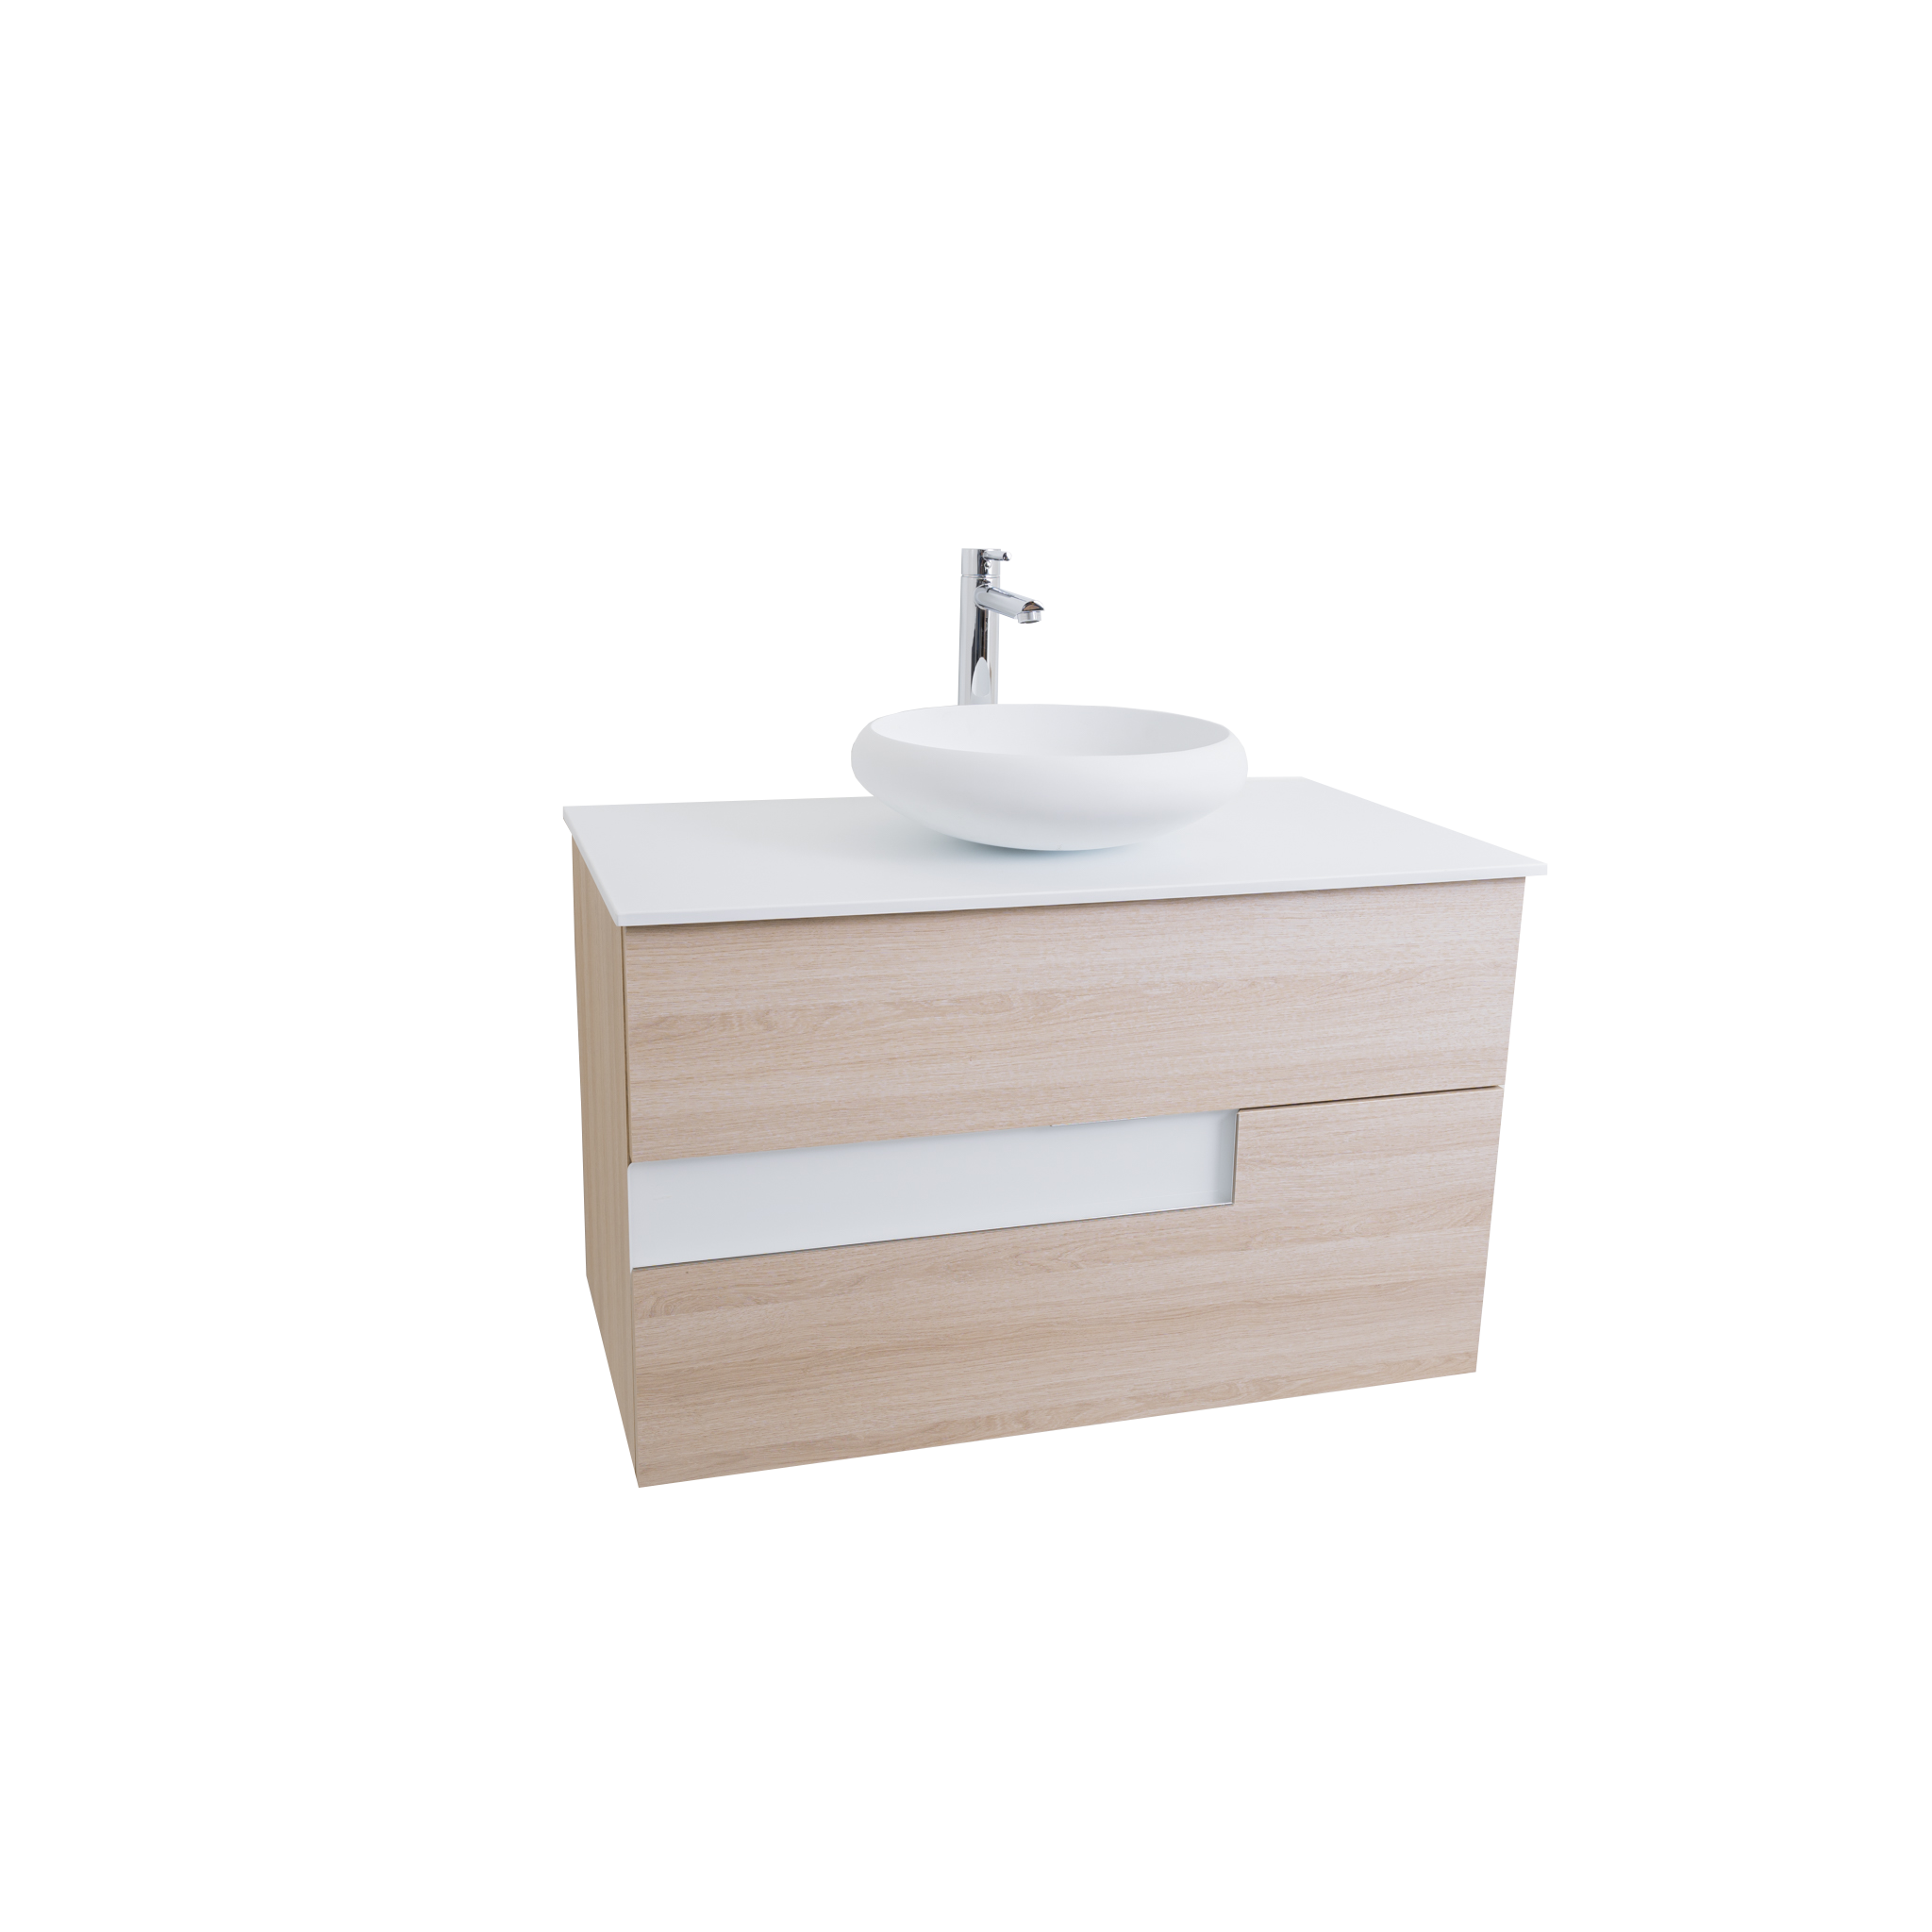 Vision 35.5 Natural Light Wood Cabinet, Solid Surface Flat White Counter And Round Solid Surface White Basin 1153, Wall Mounted Modern Vanity Set